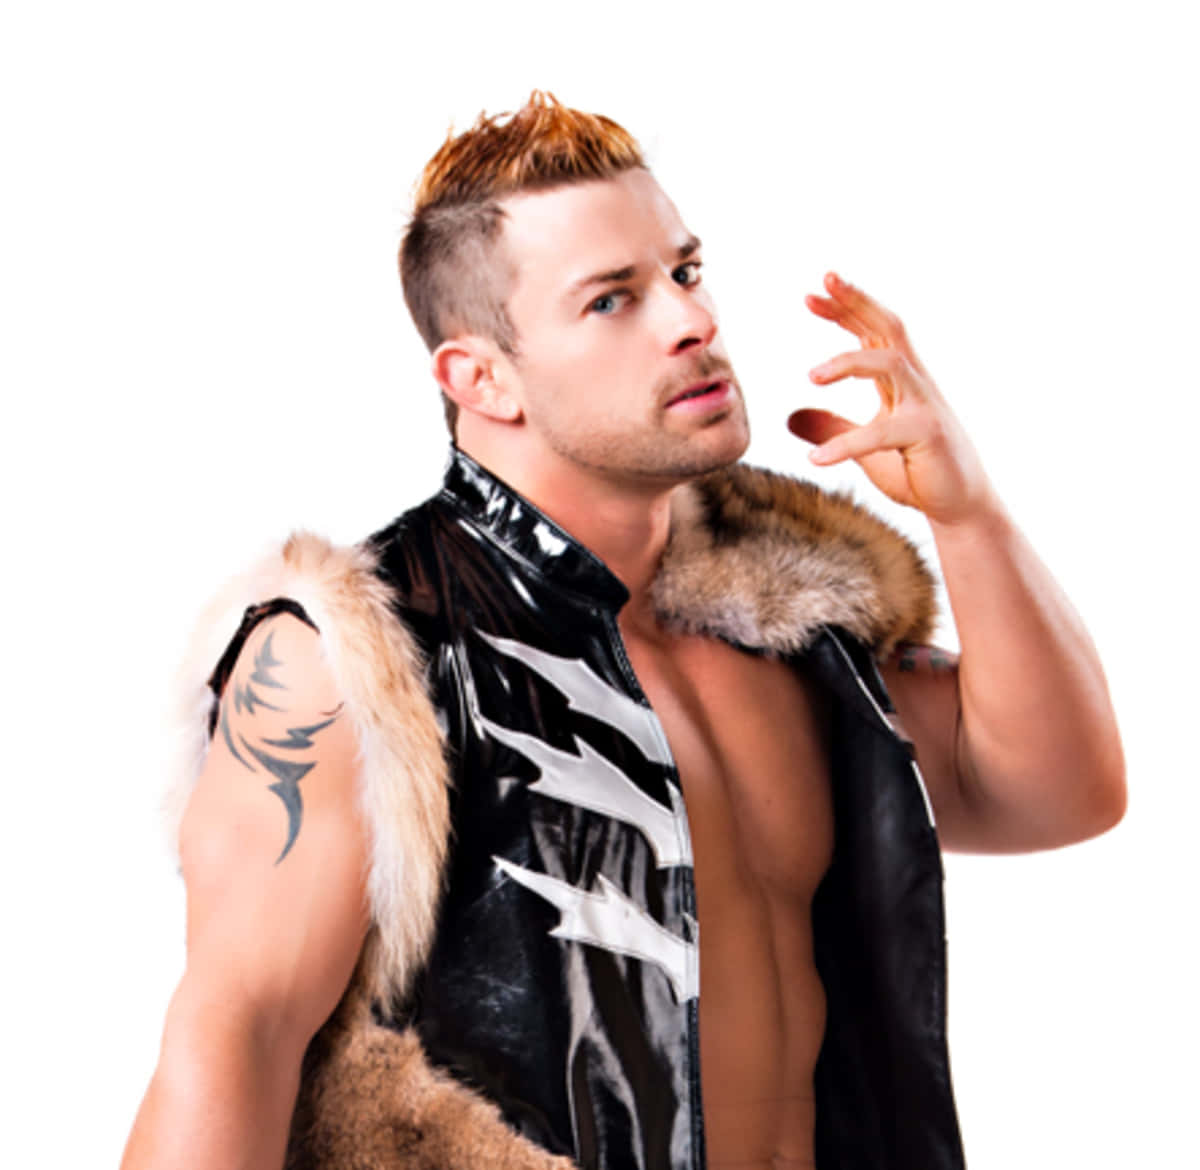 Davey Richards striking a pose in his signature Wolves Outfit Wallpaper